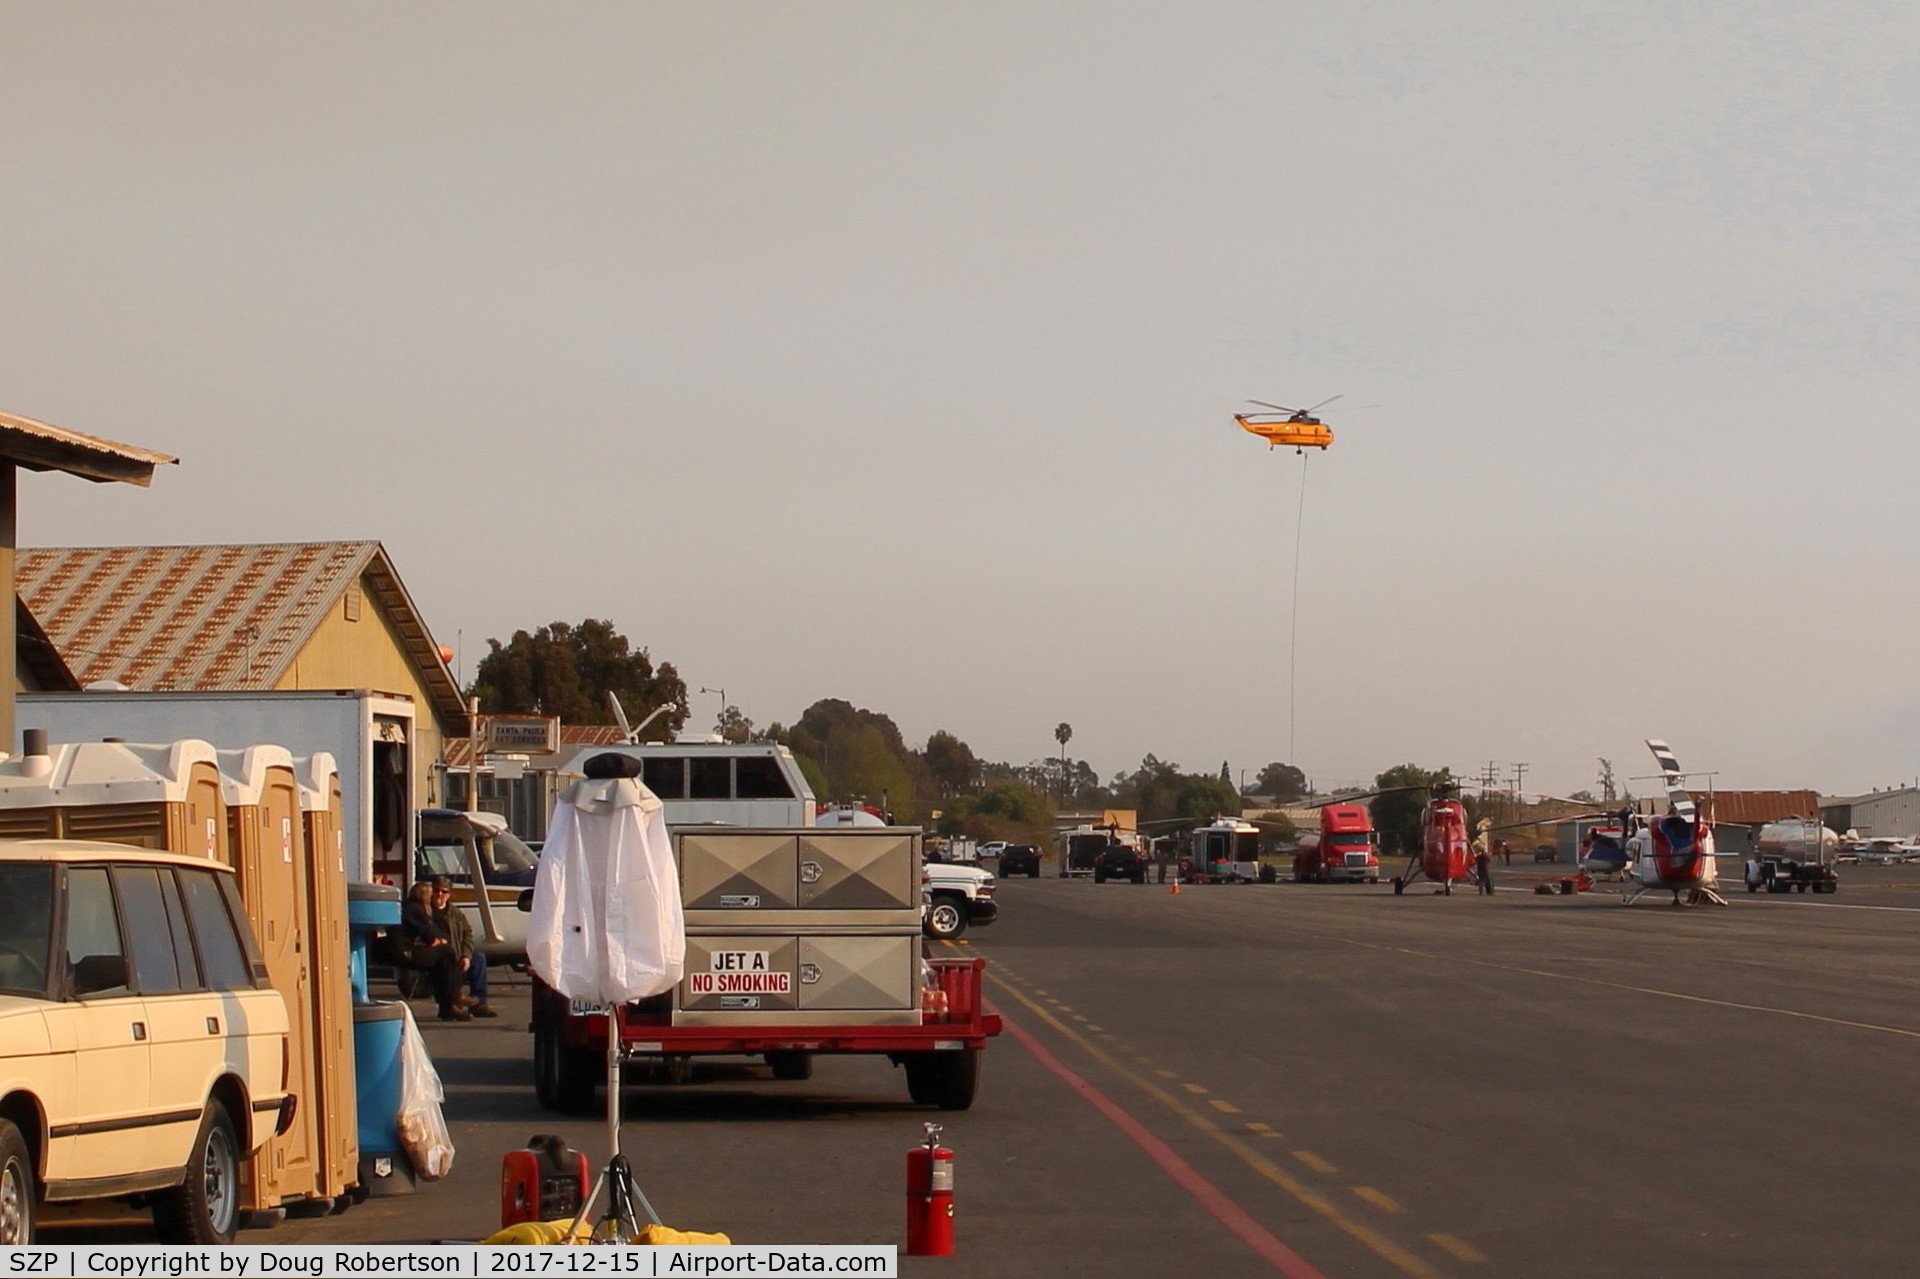 Santa Paula Airport (SZP) - CROMAN helicopter on departure to the Thomas Fire from SZP FireBase. Note PHOS-CHEK sling load and smoky sky.